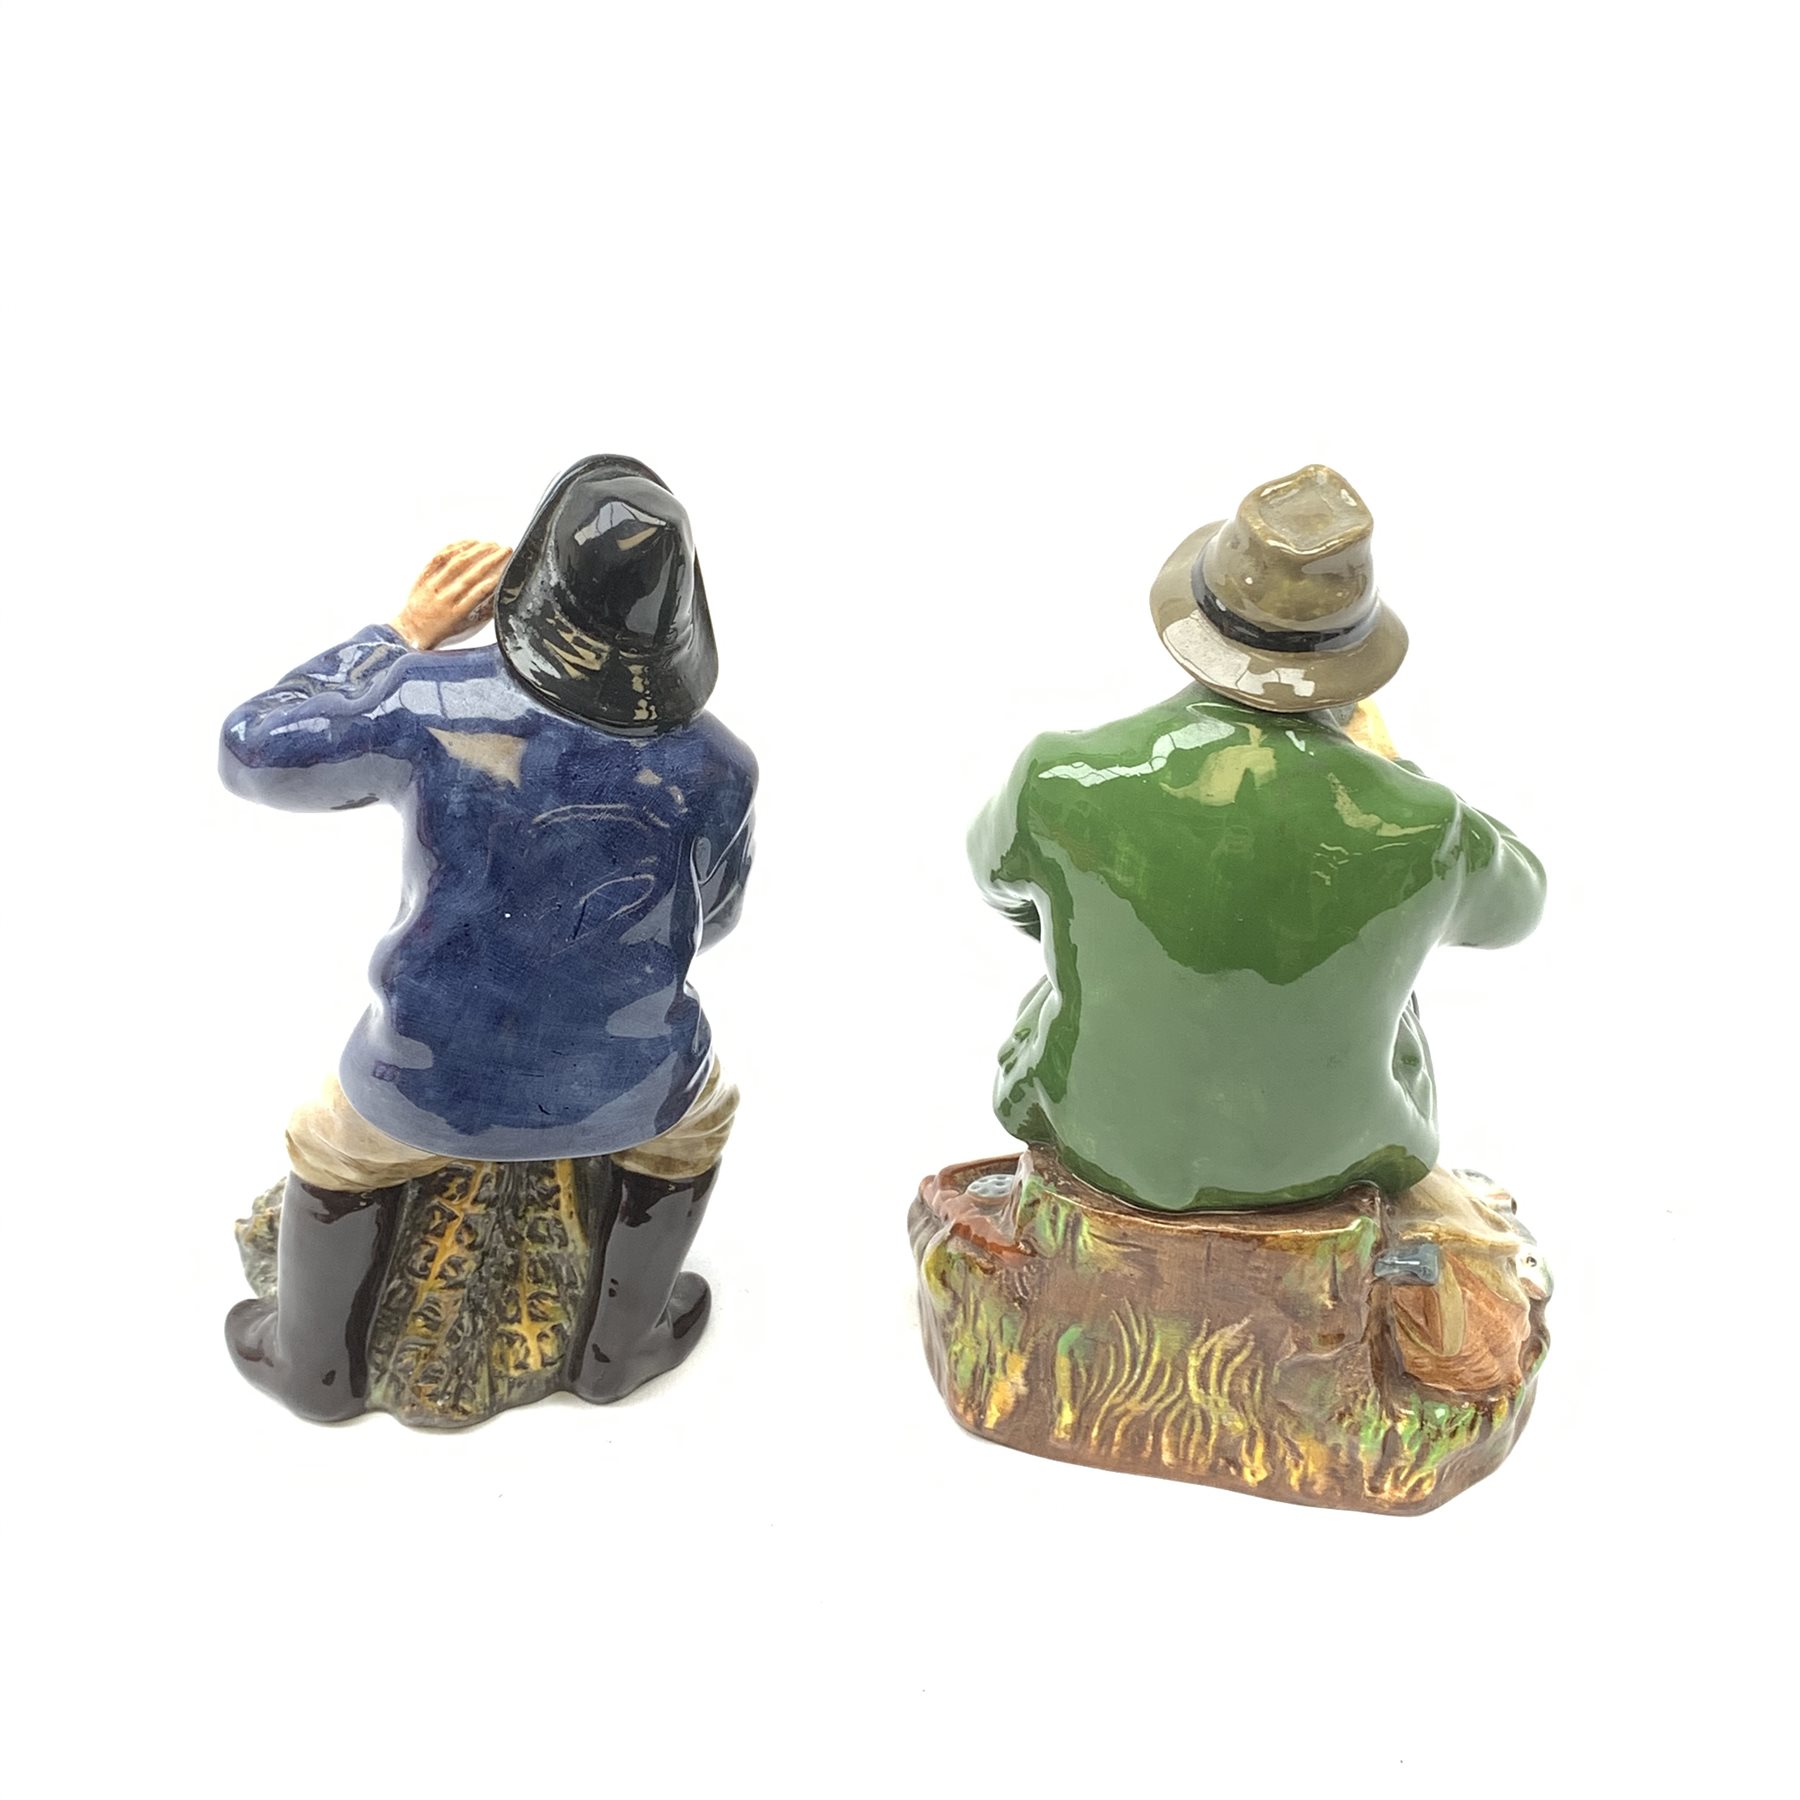 Two Royal Doulton figurines, A Good Catch HN1965, and Sea Harvest HN2357, each with green printed ma - Image 3 of 6